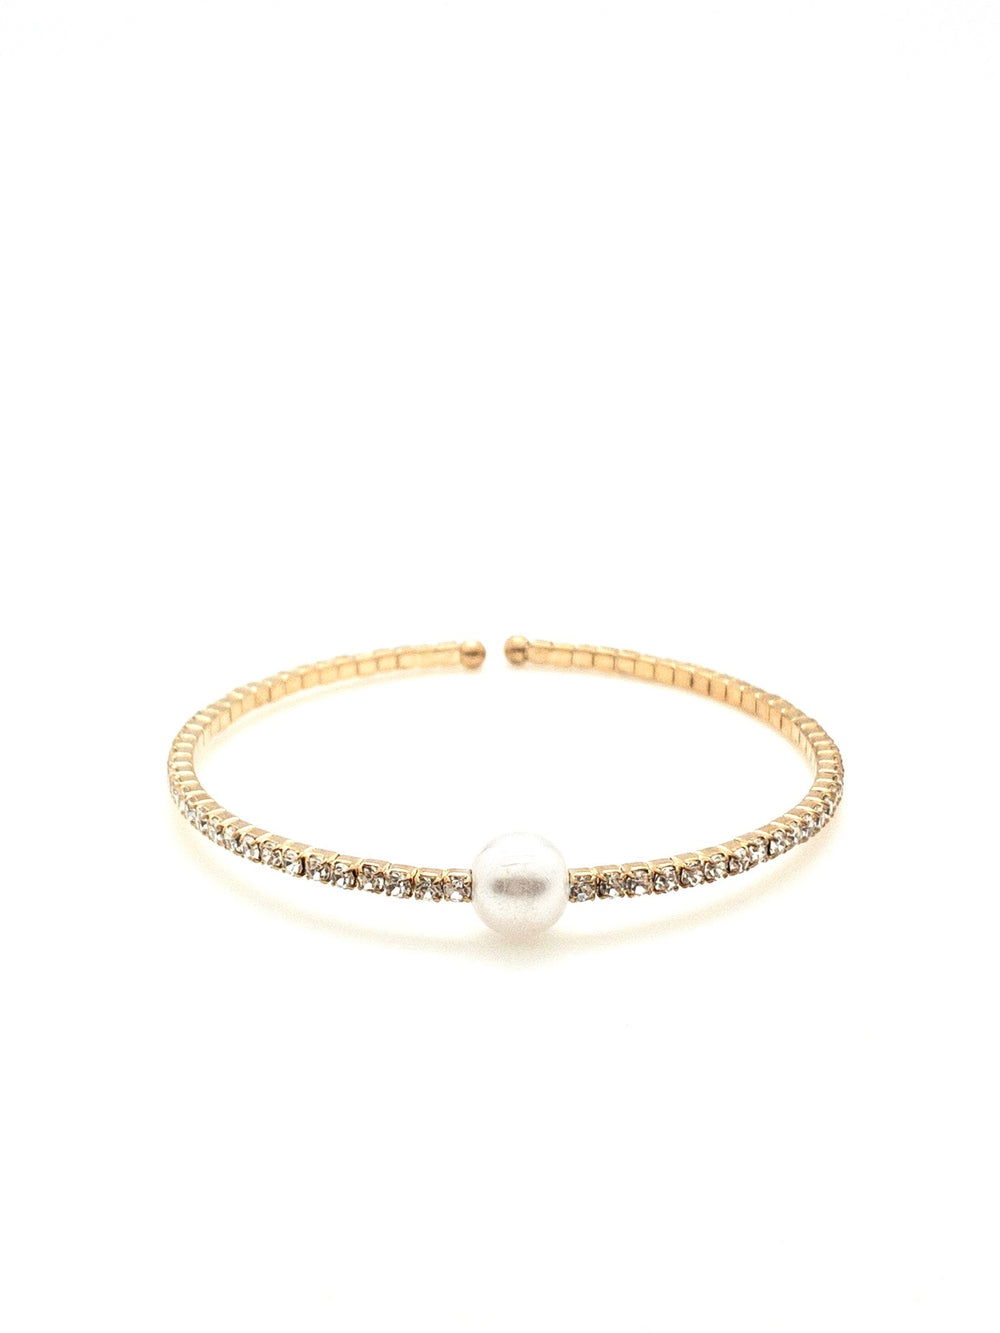 sparkly gold cuff with a pearl in the center 